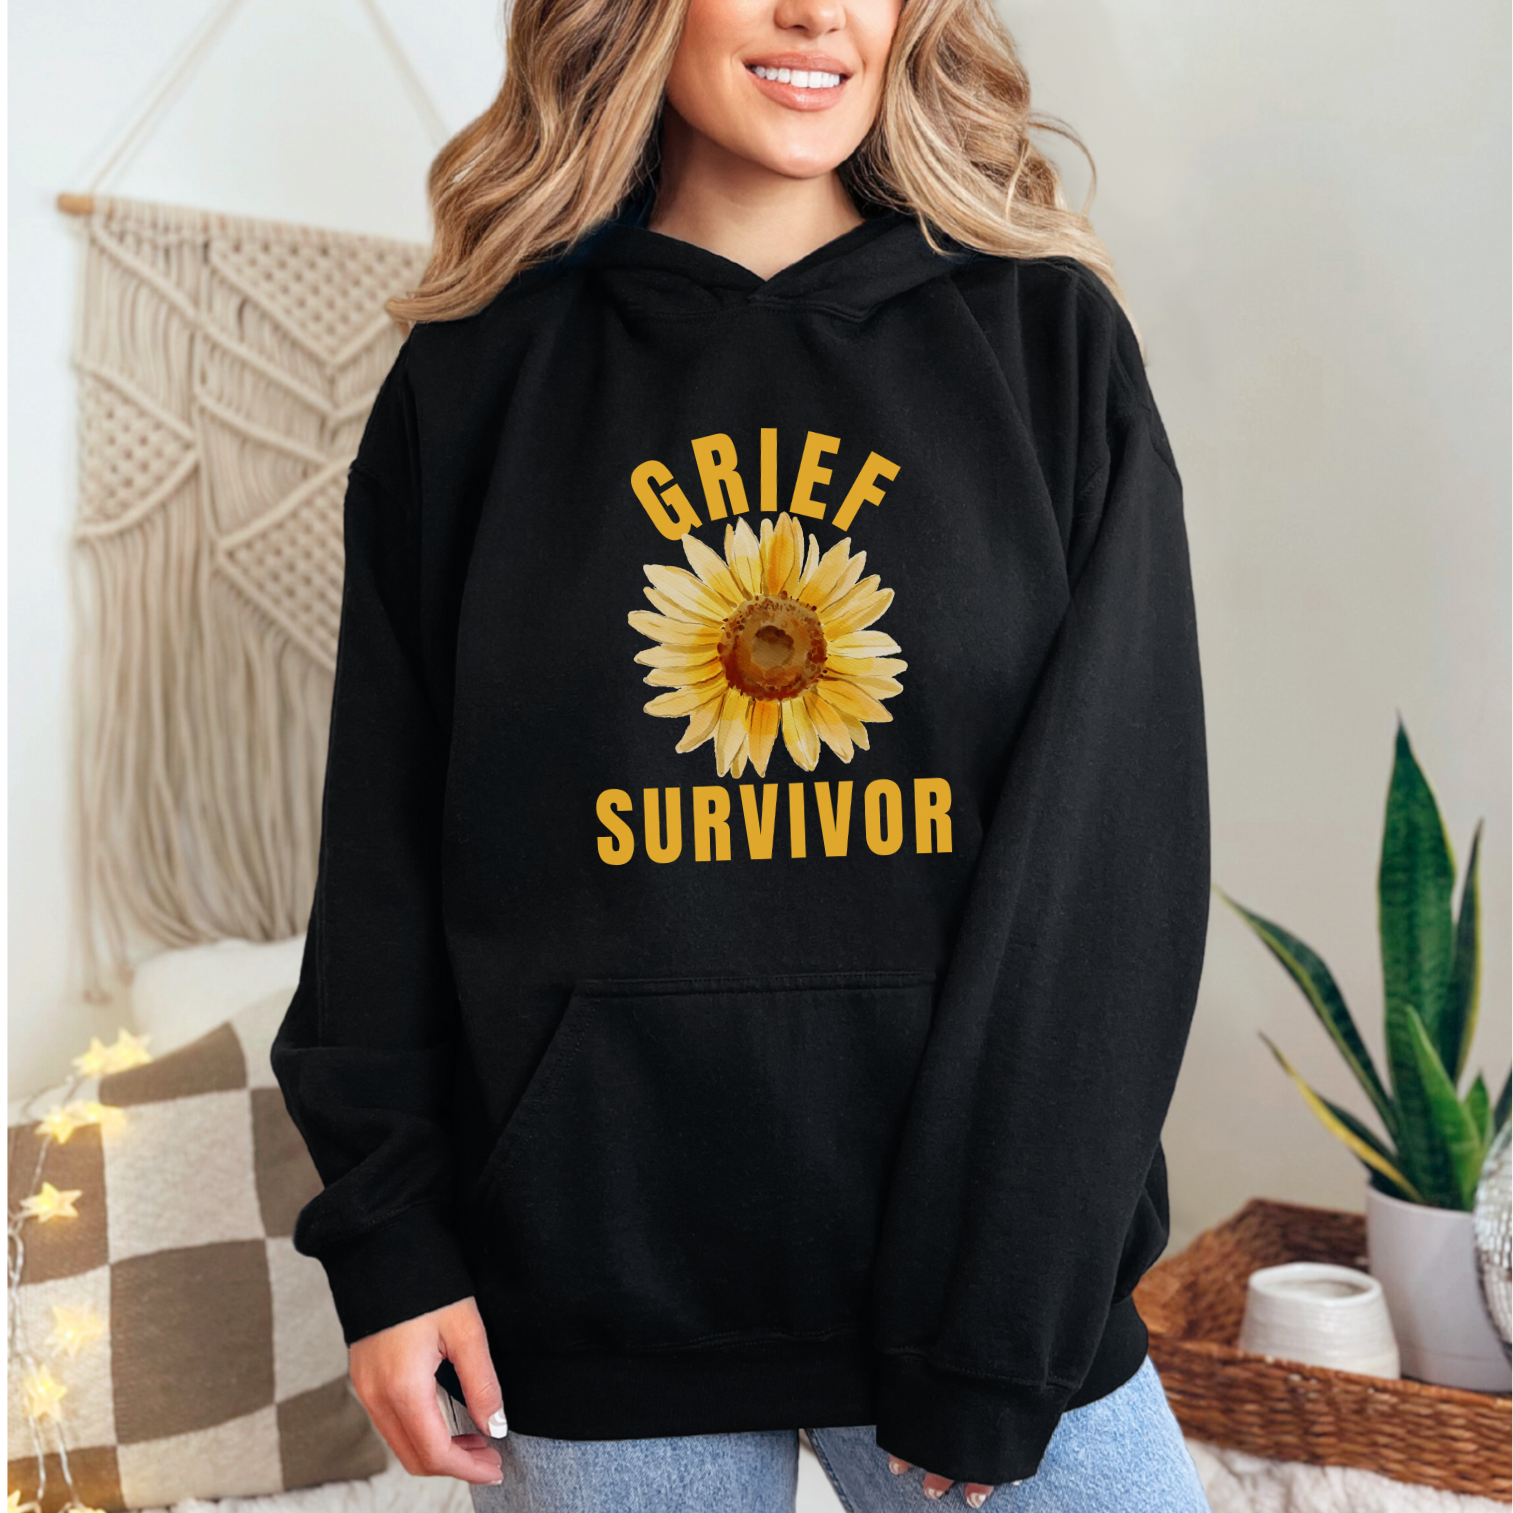 Embrace the warmth and healing comfort in our "Grief Survivor" hoodie sweatshirt in black. The perfect gift for anyone coping with loss - Gildan 18500 hooded sweatshirt.